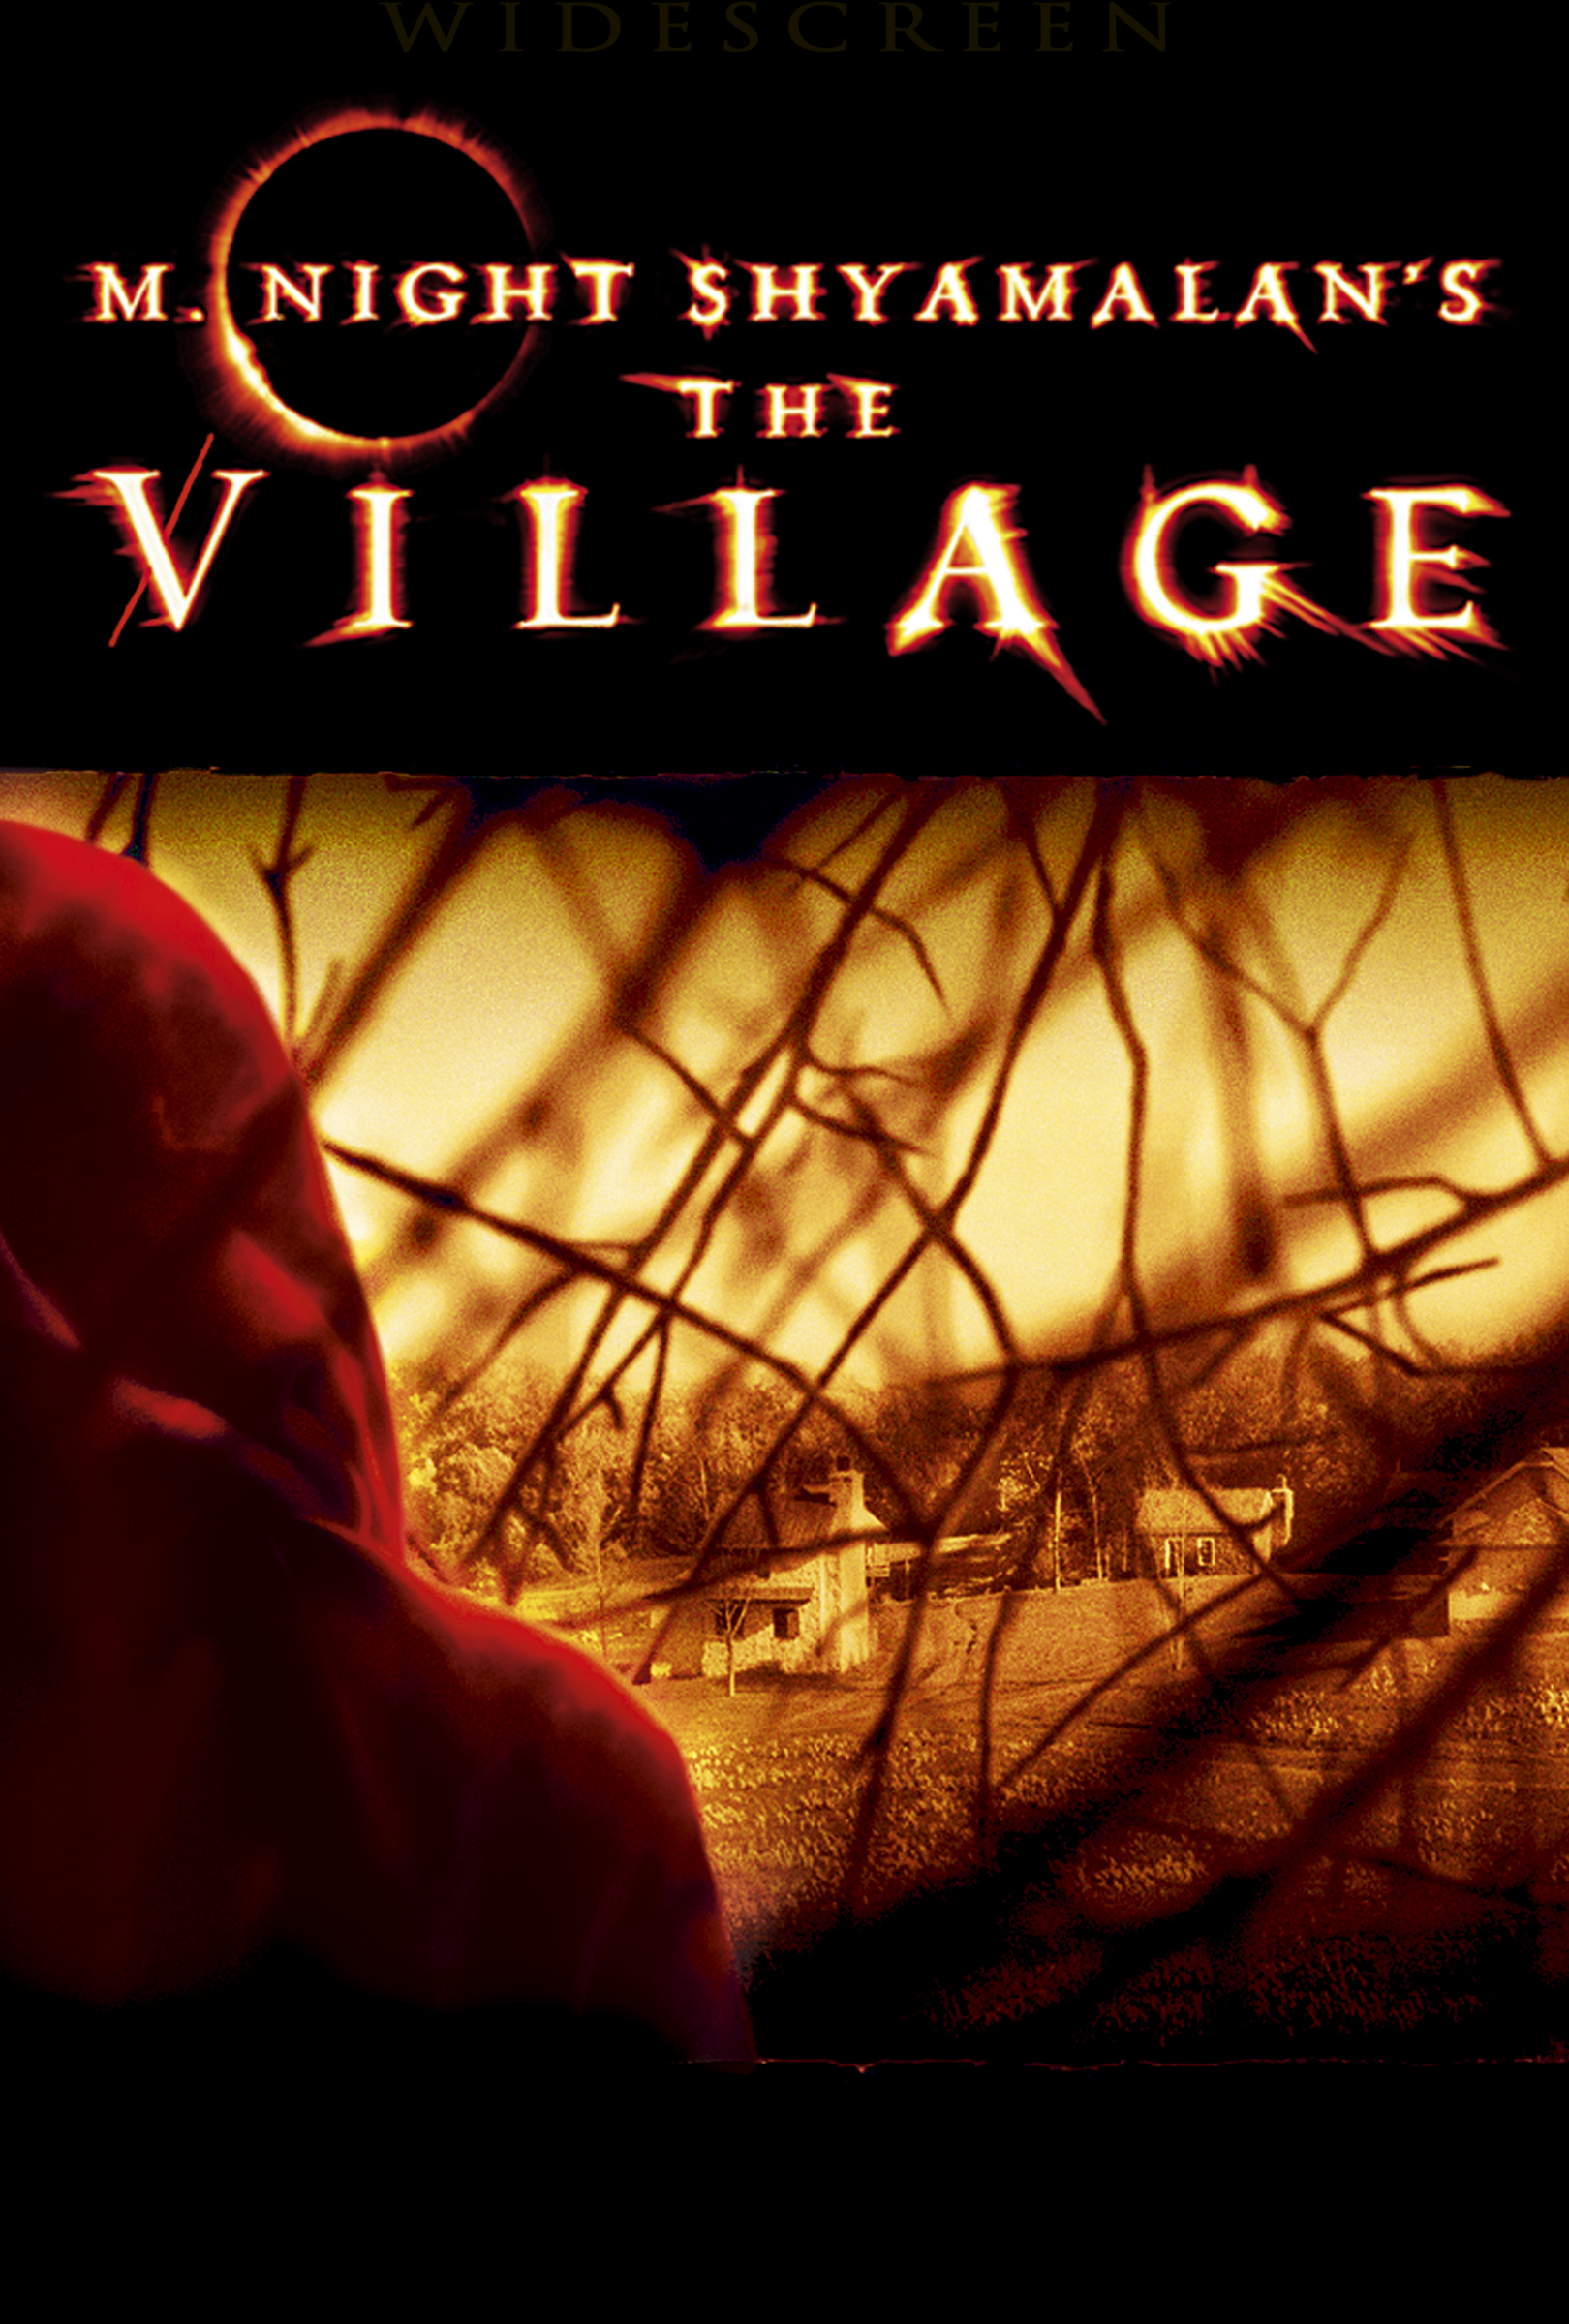 The Lost Village for ipod download